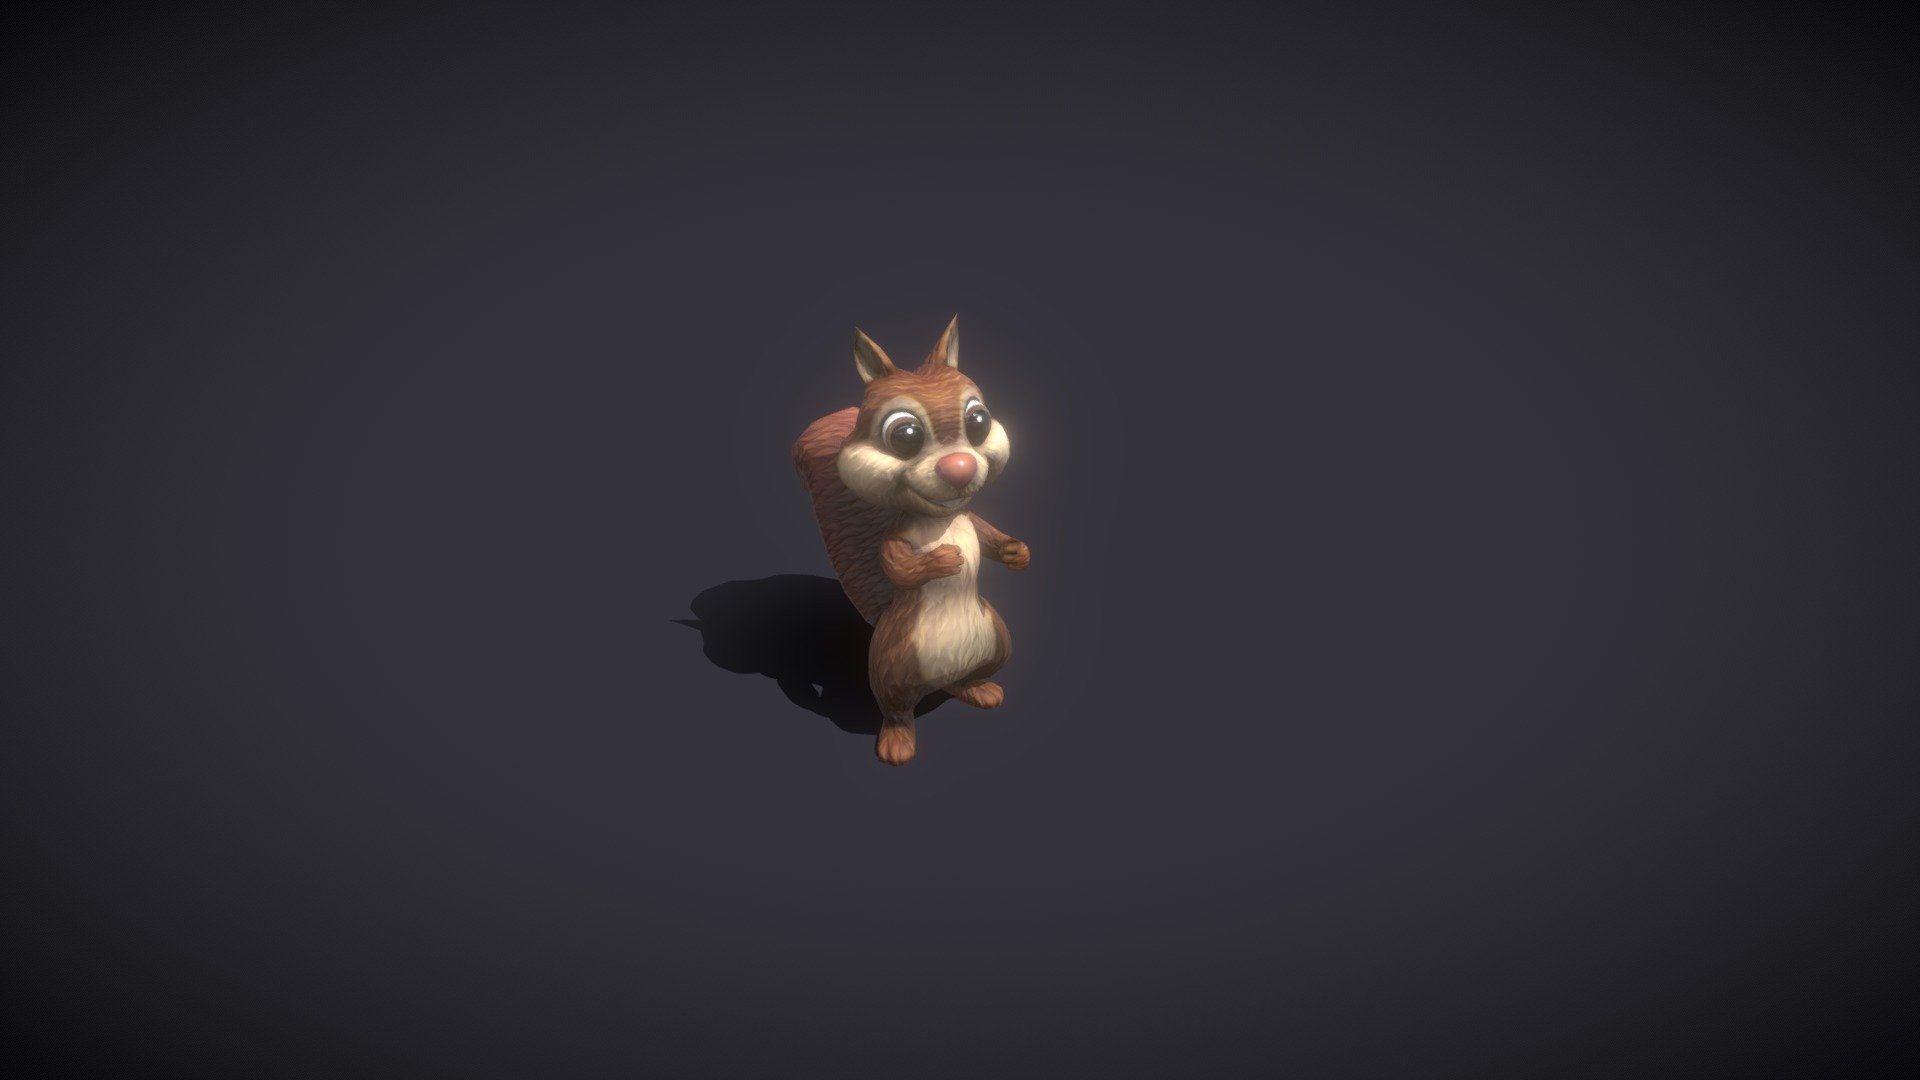 Cartoon Animated Squirrel 30 Animations 3D Model is completely ready to be used in your games, animations, films, designs etc.  

All textures and materials are included and mapped in every format. The model is completely ready for visualization in any 3d software and engine.  

Technical details:  




File formats included in the package are: FBX, GLB, ABC, DAE, OBJ, PLY, STL, BLEND, UnityPackage, gLTF (generated), USDZ (generated)

Native software file format: BLEND

Render engine: Eevee

Polygons: 2,164

Vertices: 1,761

Textures: Color, Metallic, Roughness, Normal, AO

All textures are 2k resolution.

The model is rigged and animated.

30 animations are included

Only following formats contain rig and animation: BLEND, FBX, GLTF/GLB, UnityPackage
 - Cartoon Animated Squirrel 30 Animations 3D Model - Buy Royalty Free 3D model by 3DDisco 3d model